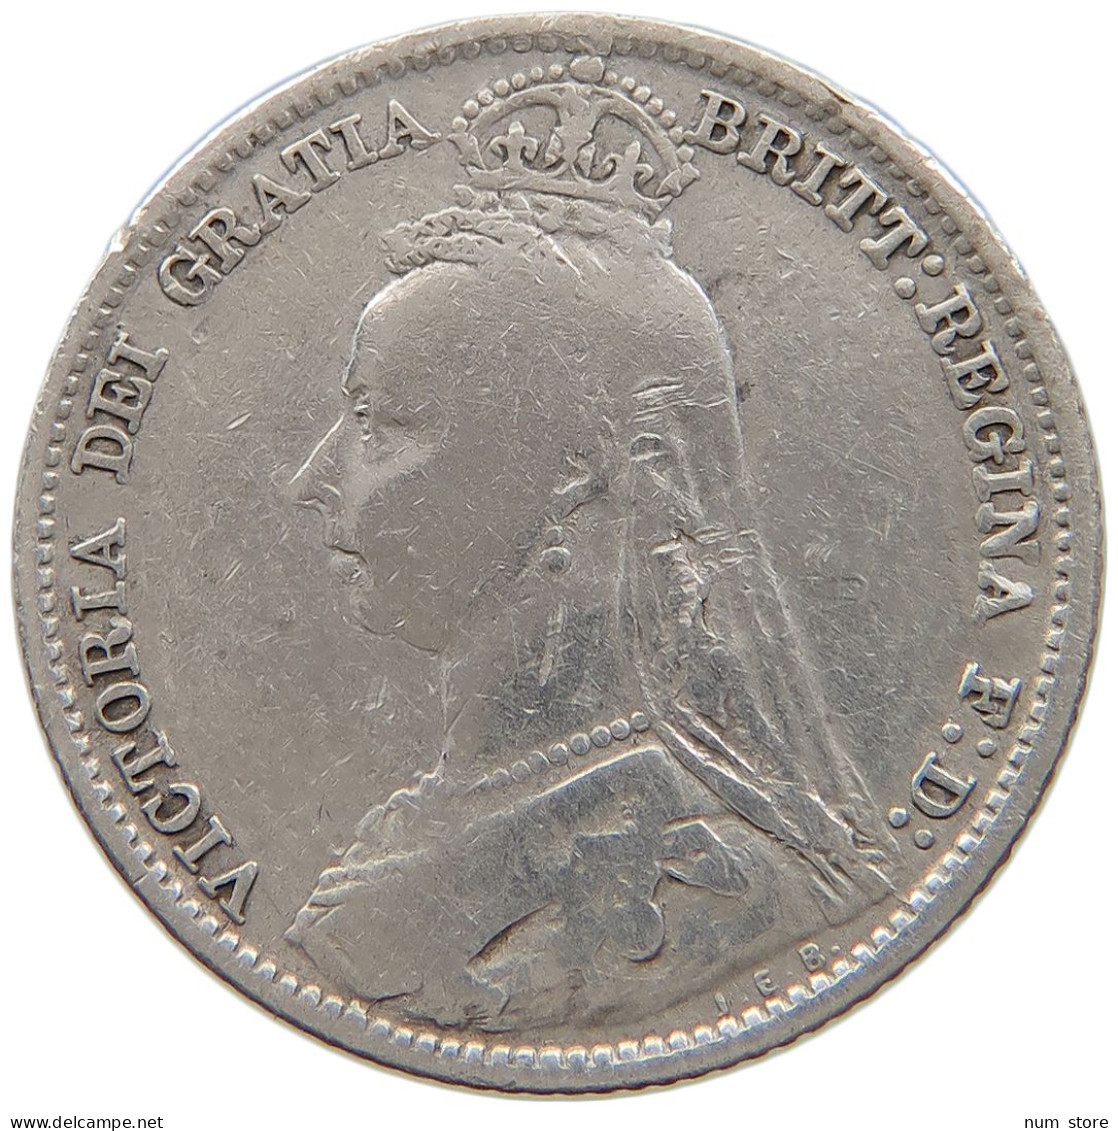 GREAT BRITAIN SIXPENCE 1891 Victoria 1837-1901 #t158 0393 - H. 6 Pence